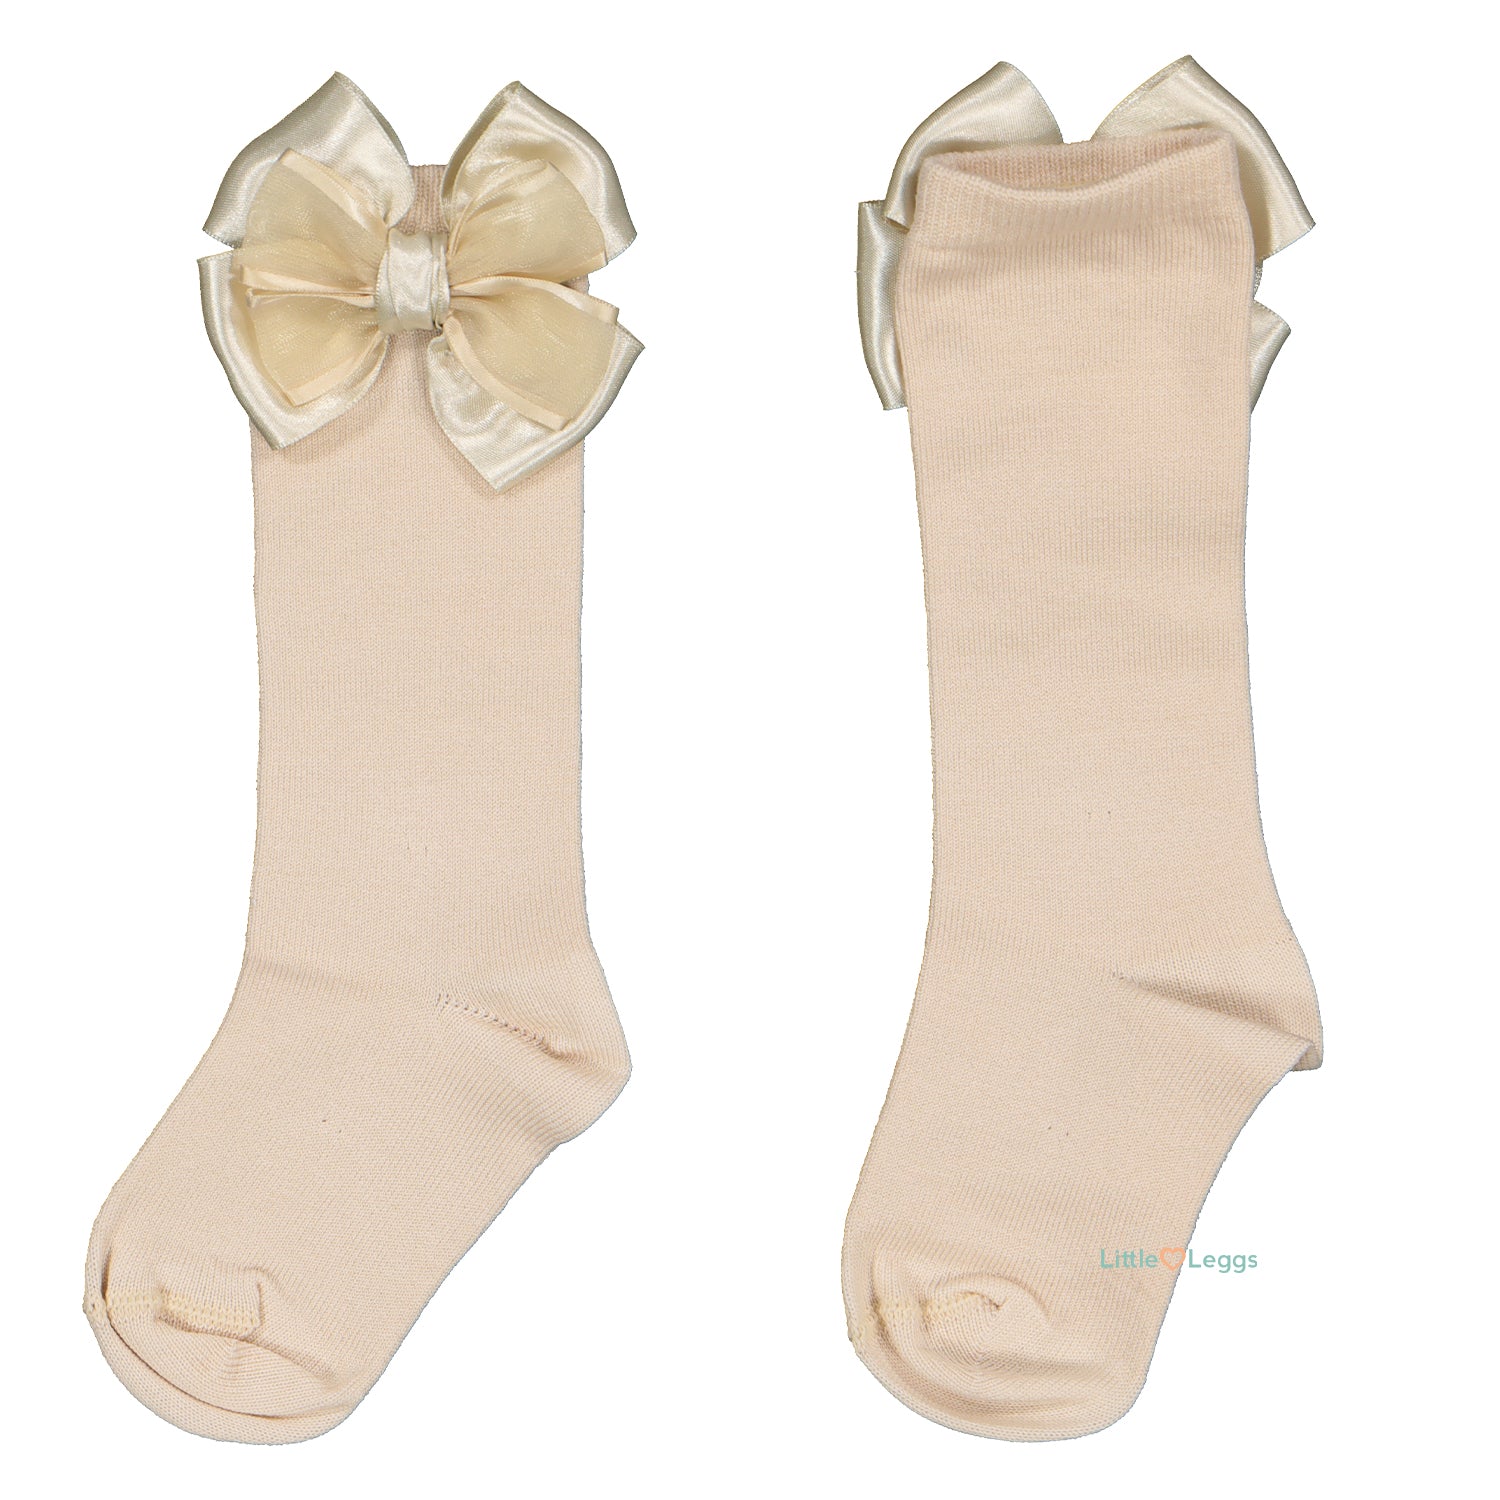 Champagne Double Bow Socks - Knee High